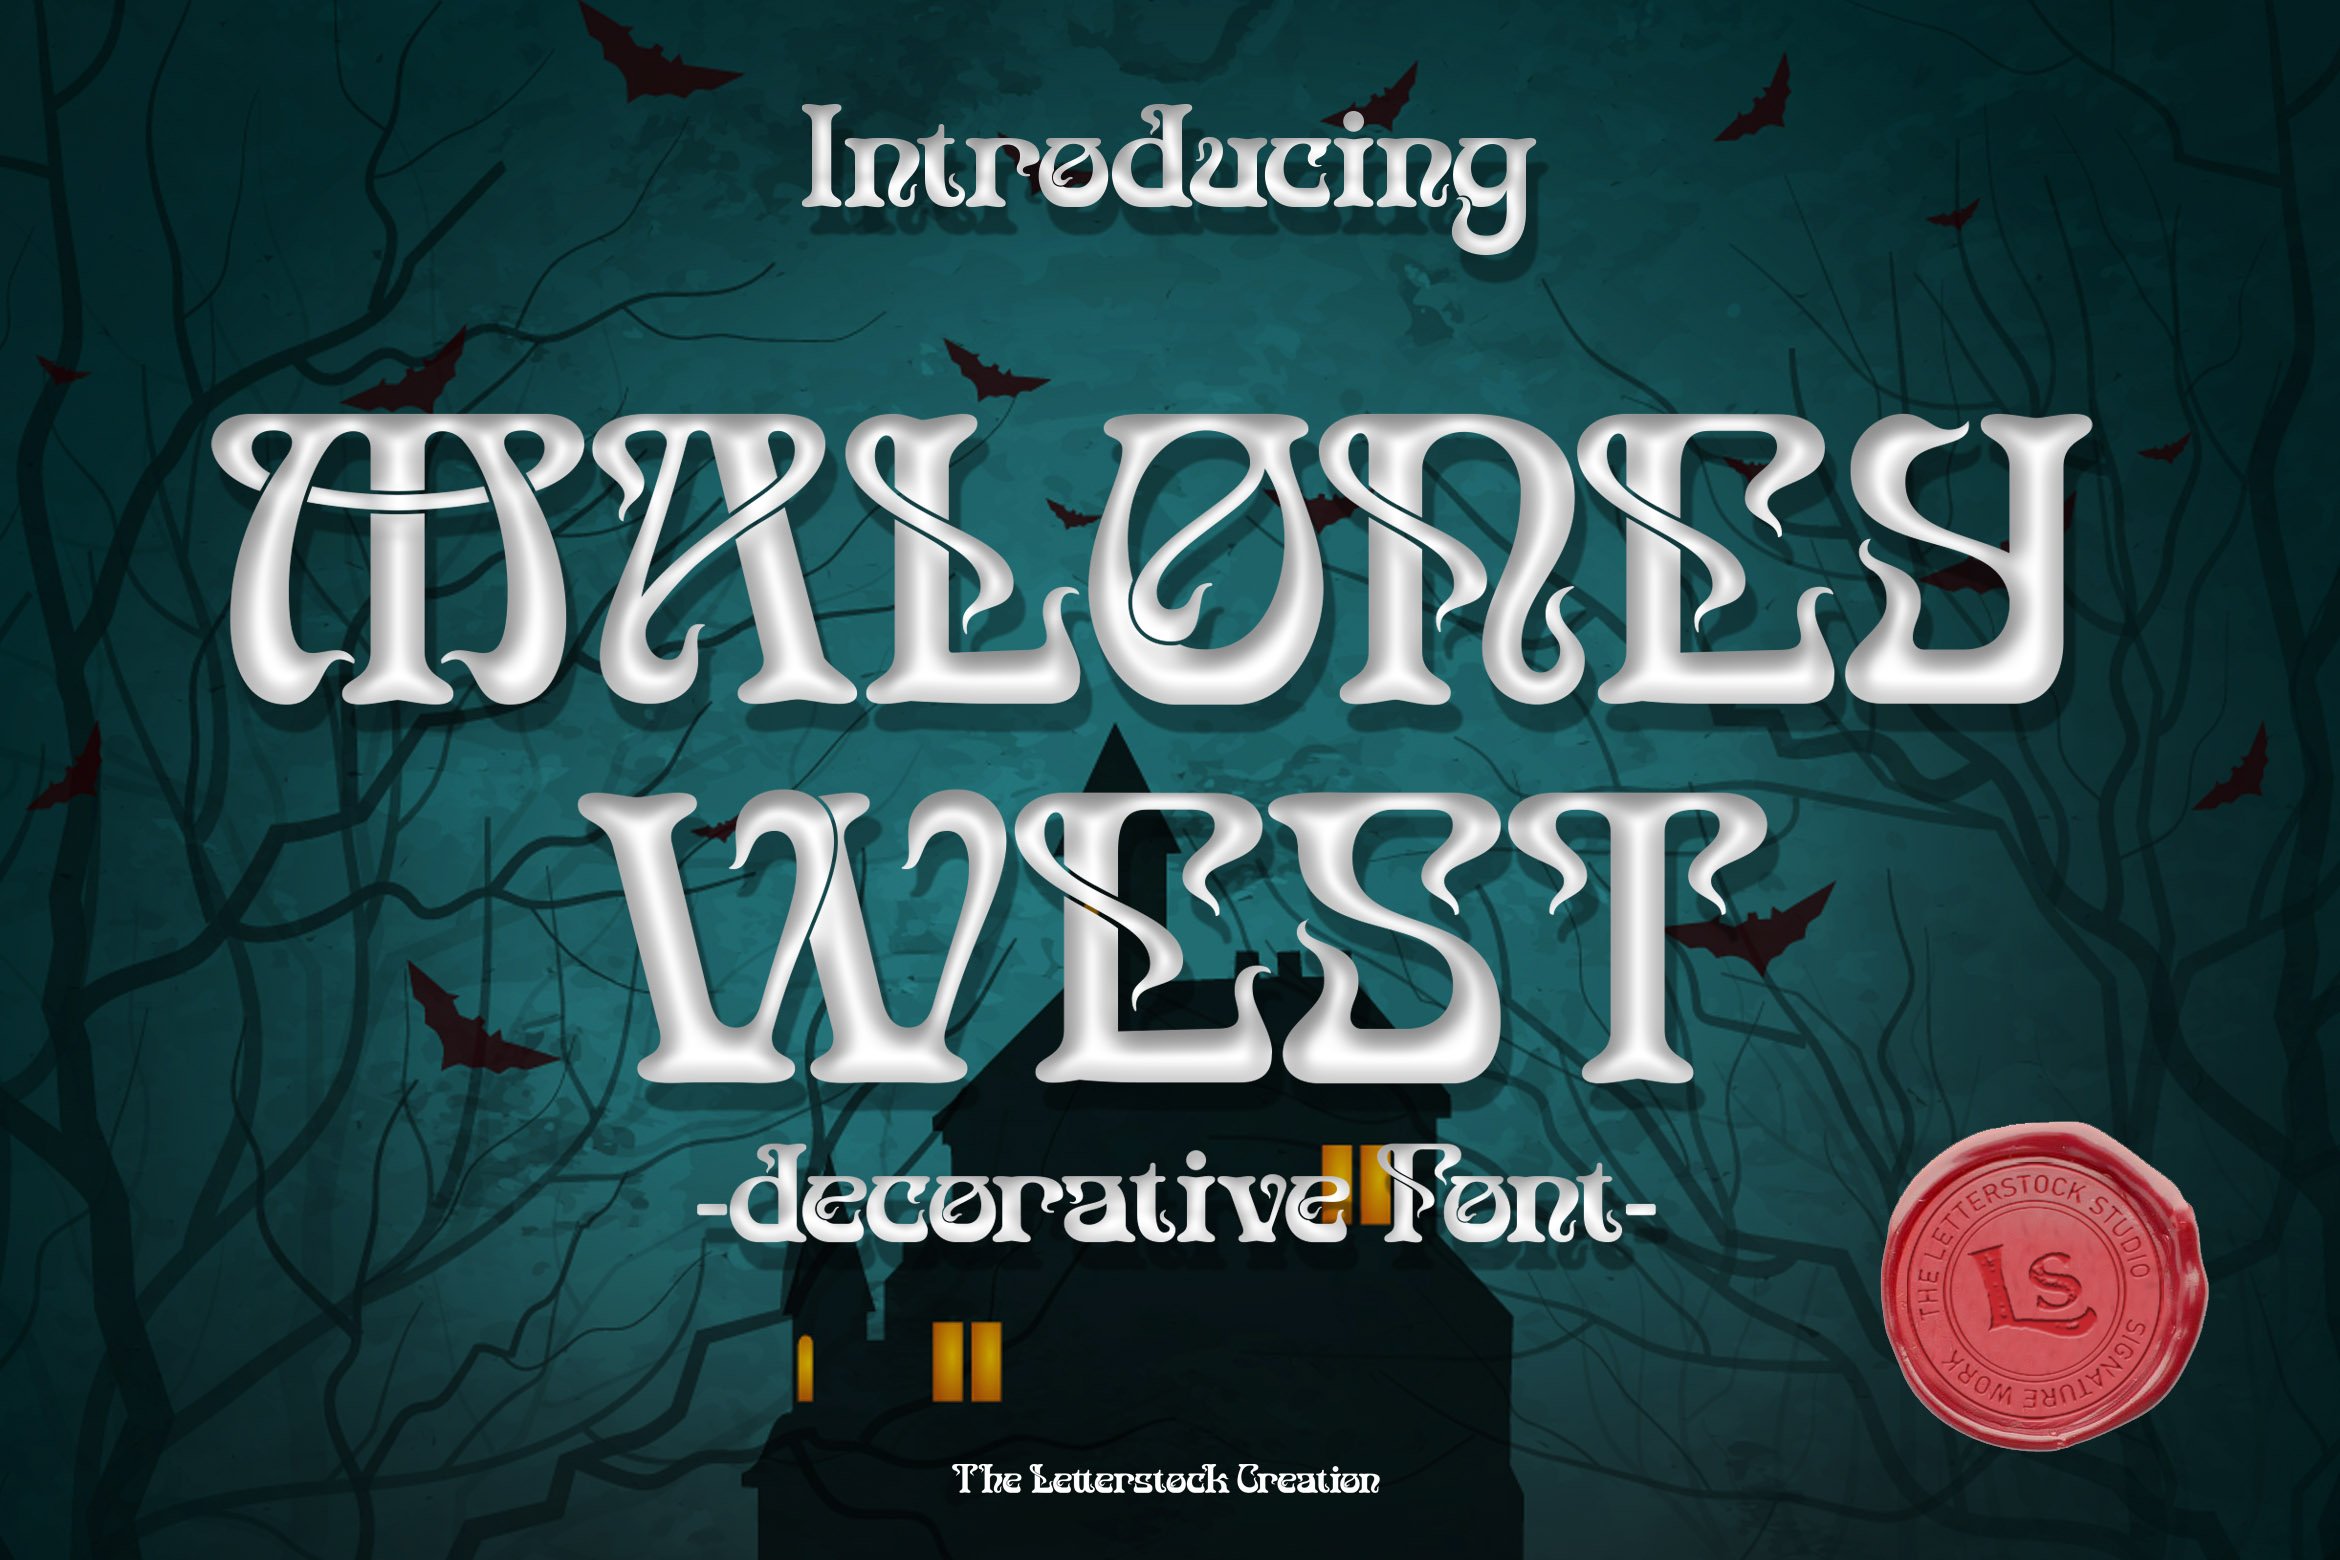 Maloney West cover image.